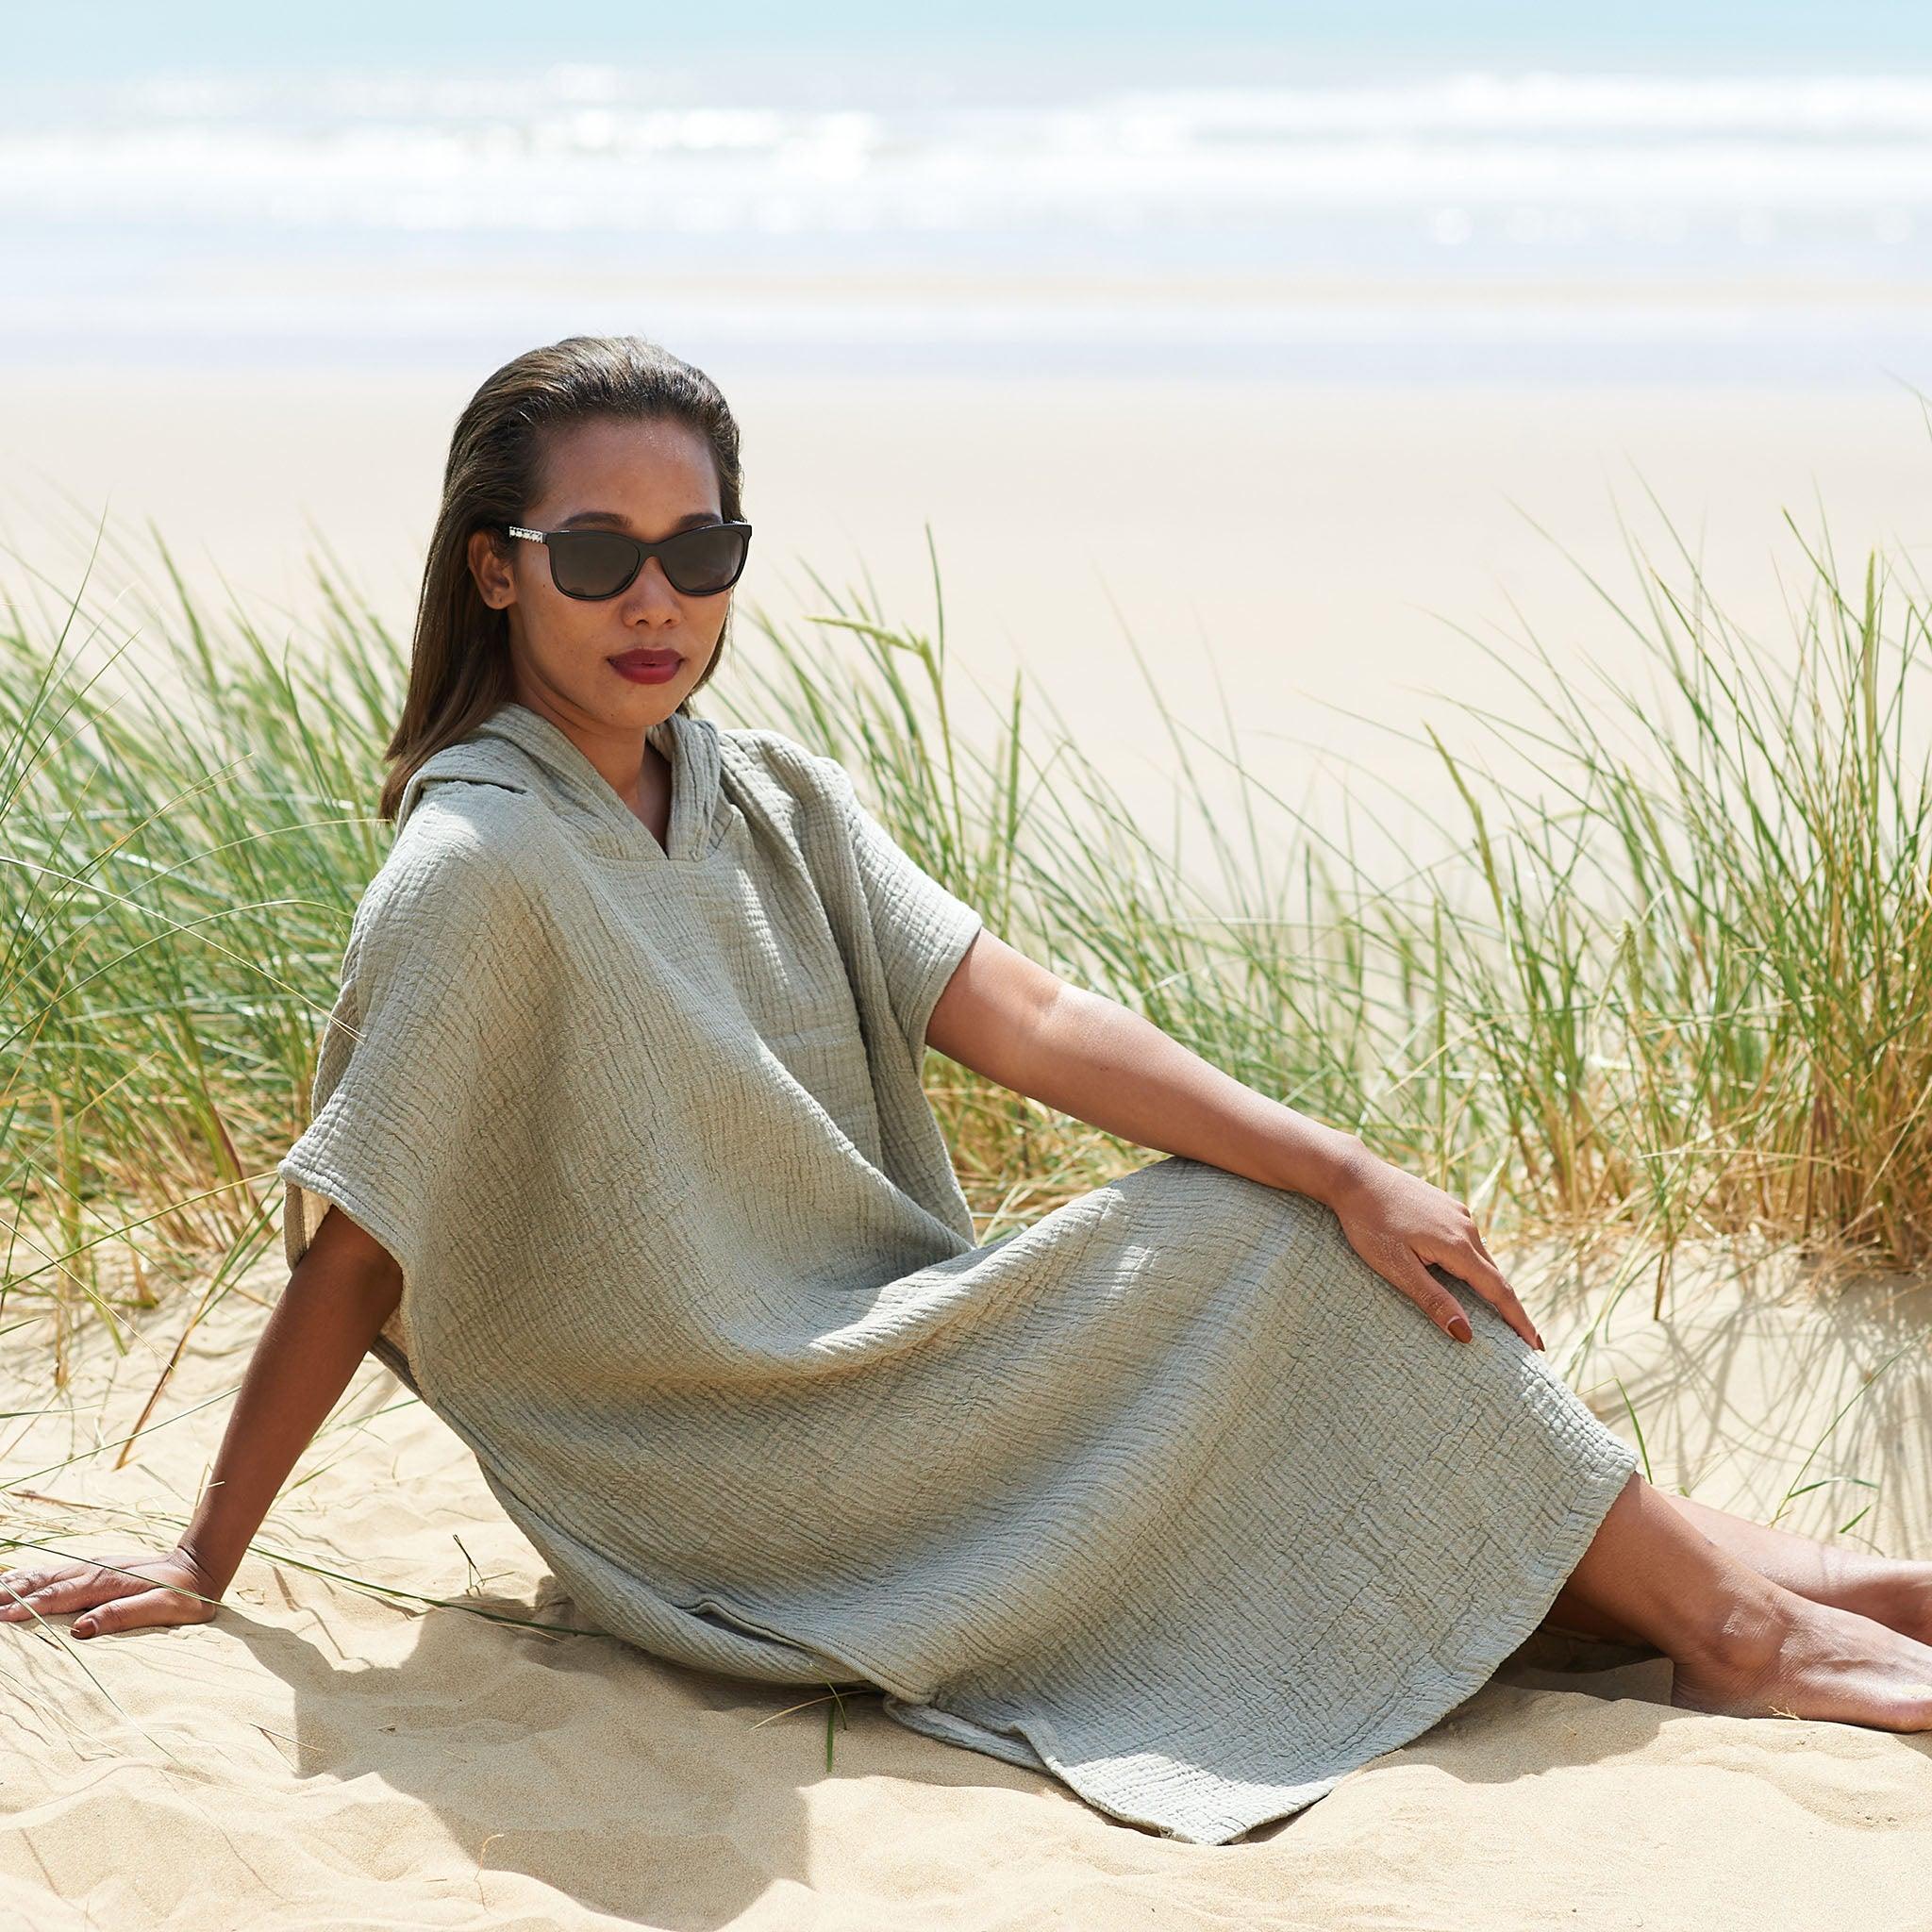 Lady sat at the beach wearing a Lorima beach changing robe and sunglasses.  